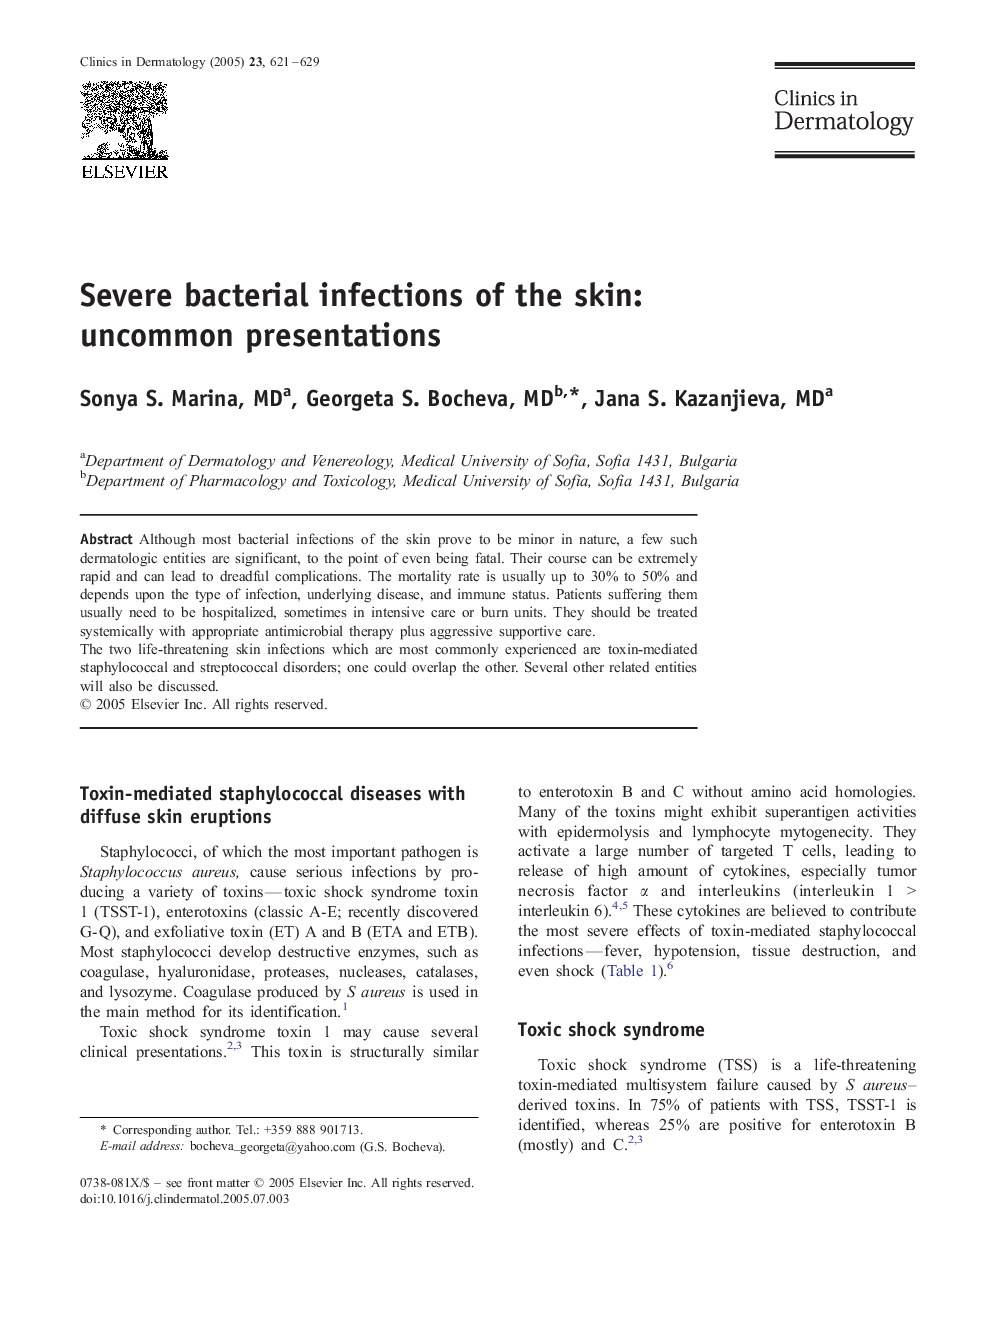 Severe bacterial infections of the skin: uncommon presentations